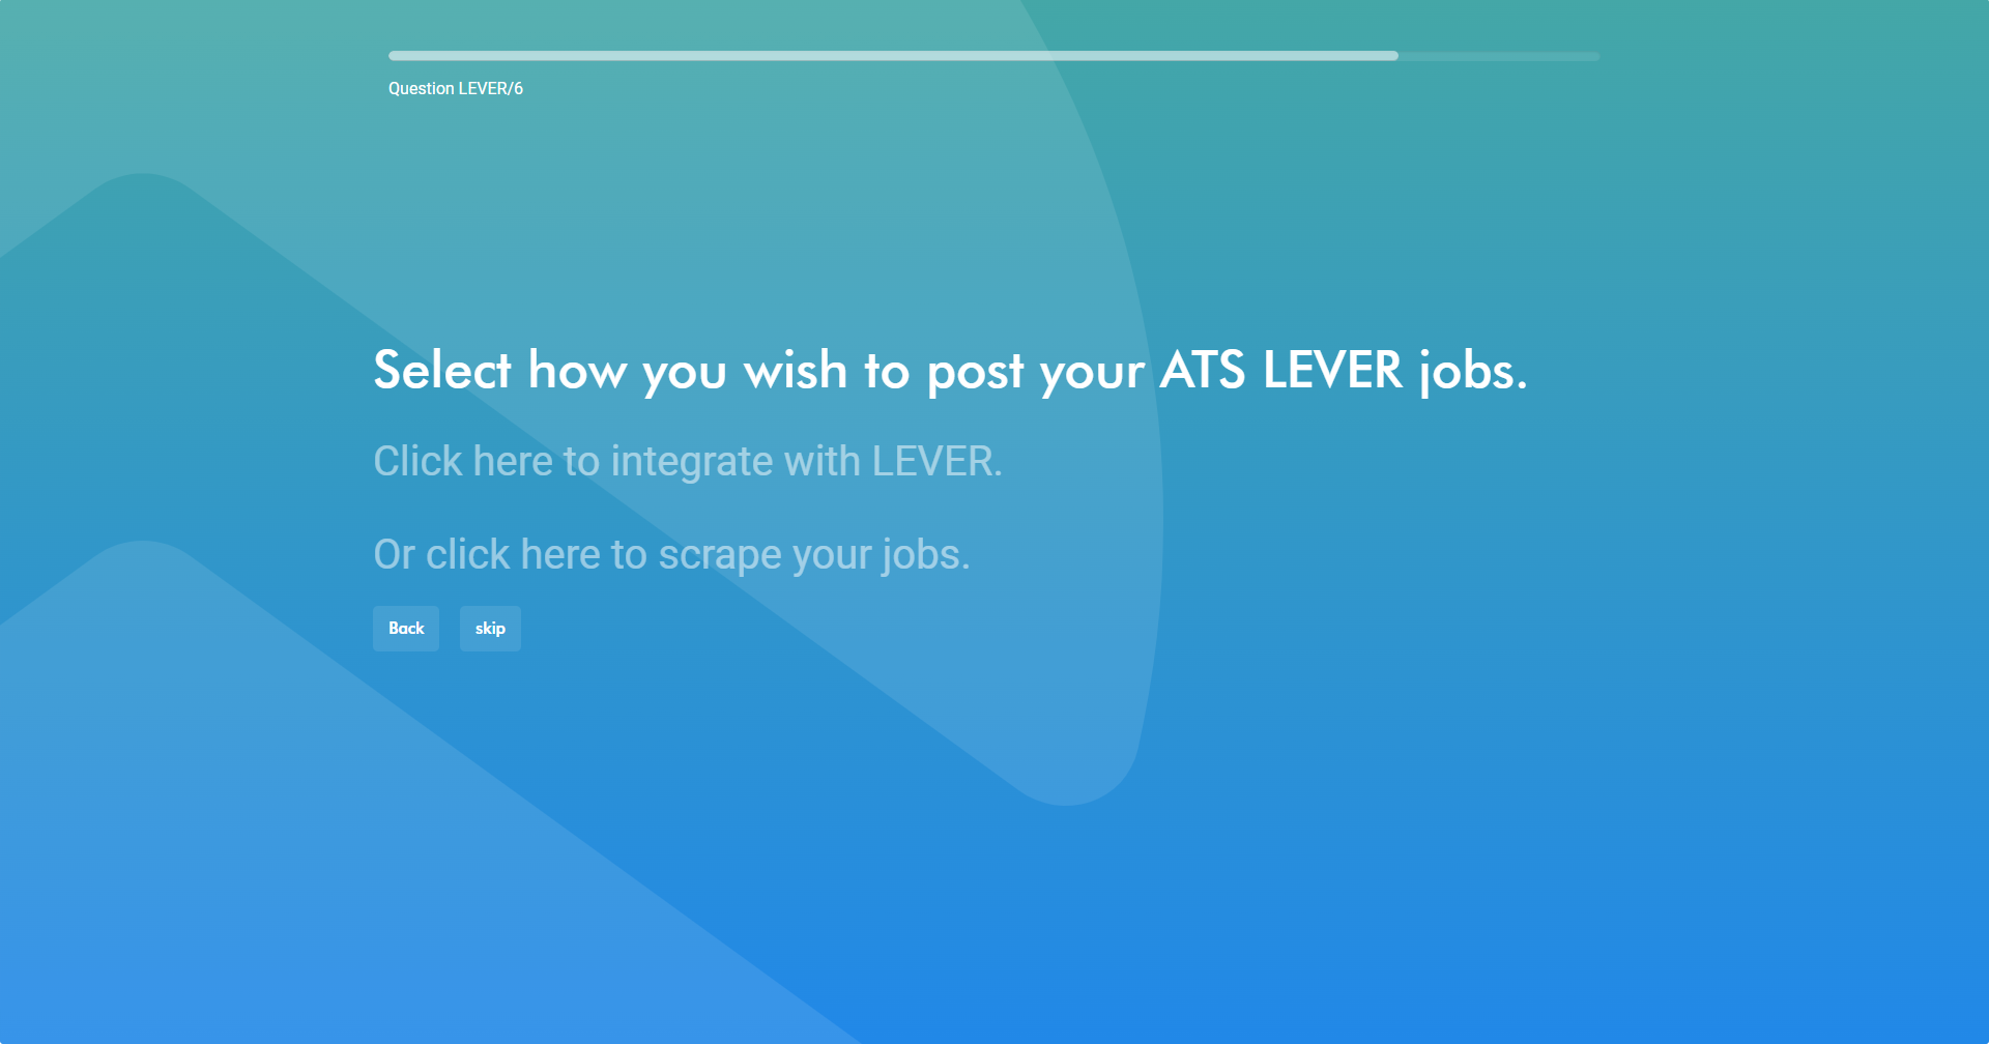 Page in Leap reading 'Select how you wish to post your ATS Lever jobs' with options reading 'Click here to integration with Lever' and 'Or click here to scrape jobs'.